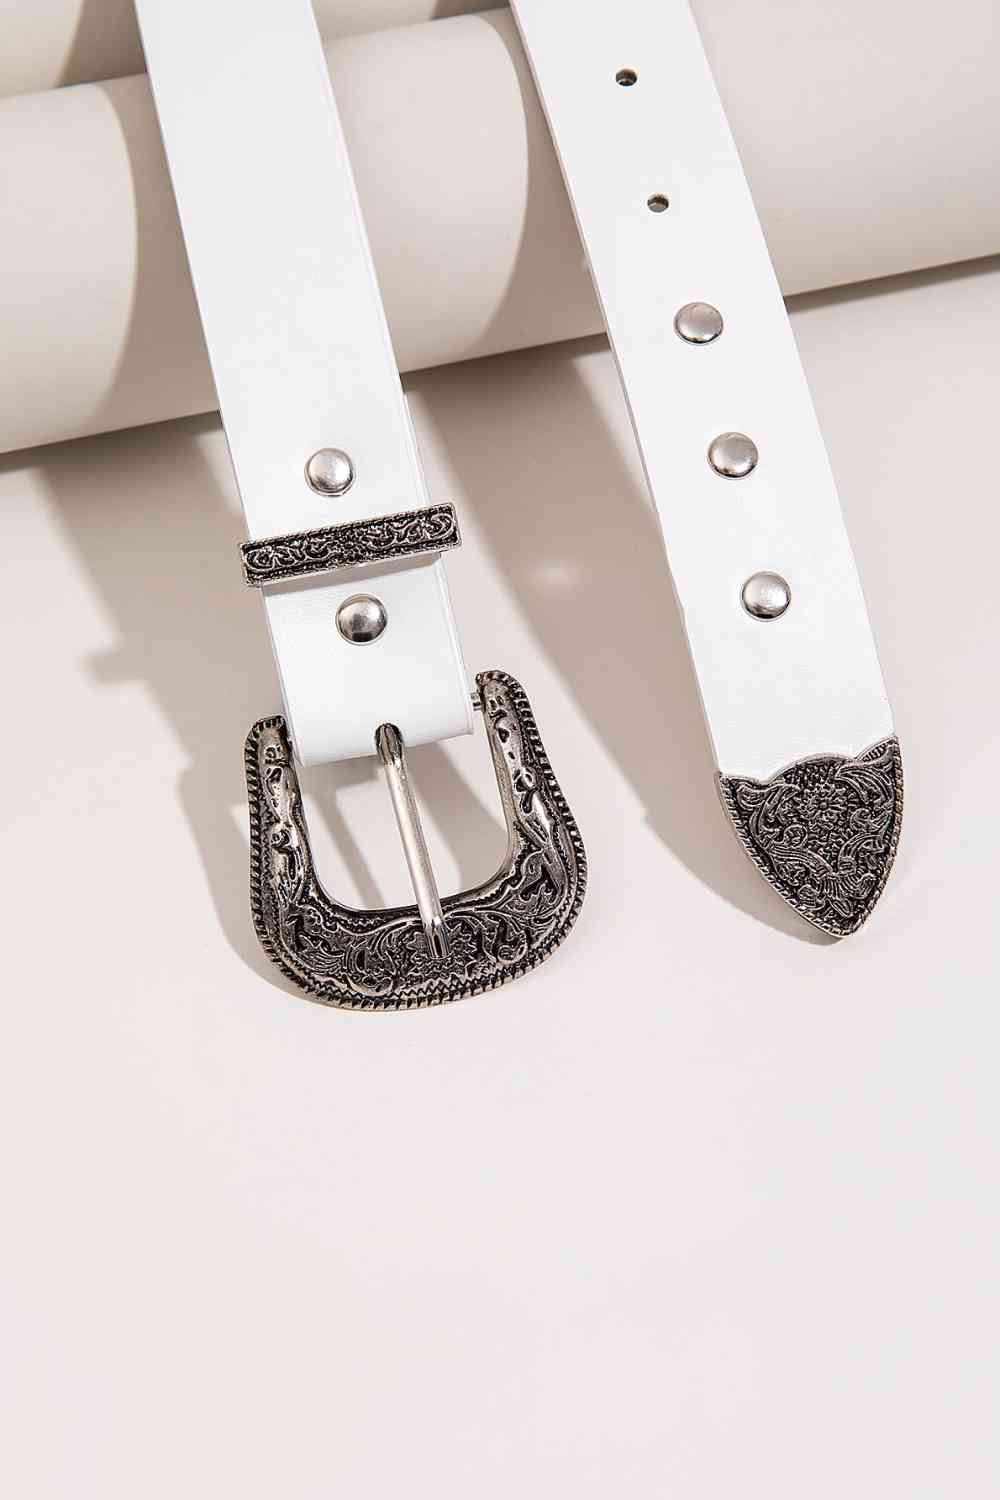 Light Gray PU Leather Studded Belt Sentient Beauty Fashions Apparel &amp; Accessories